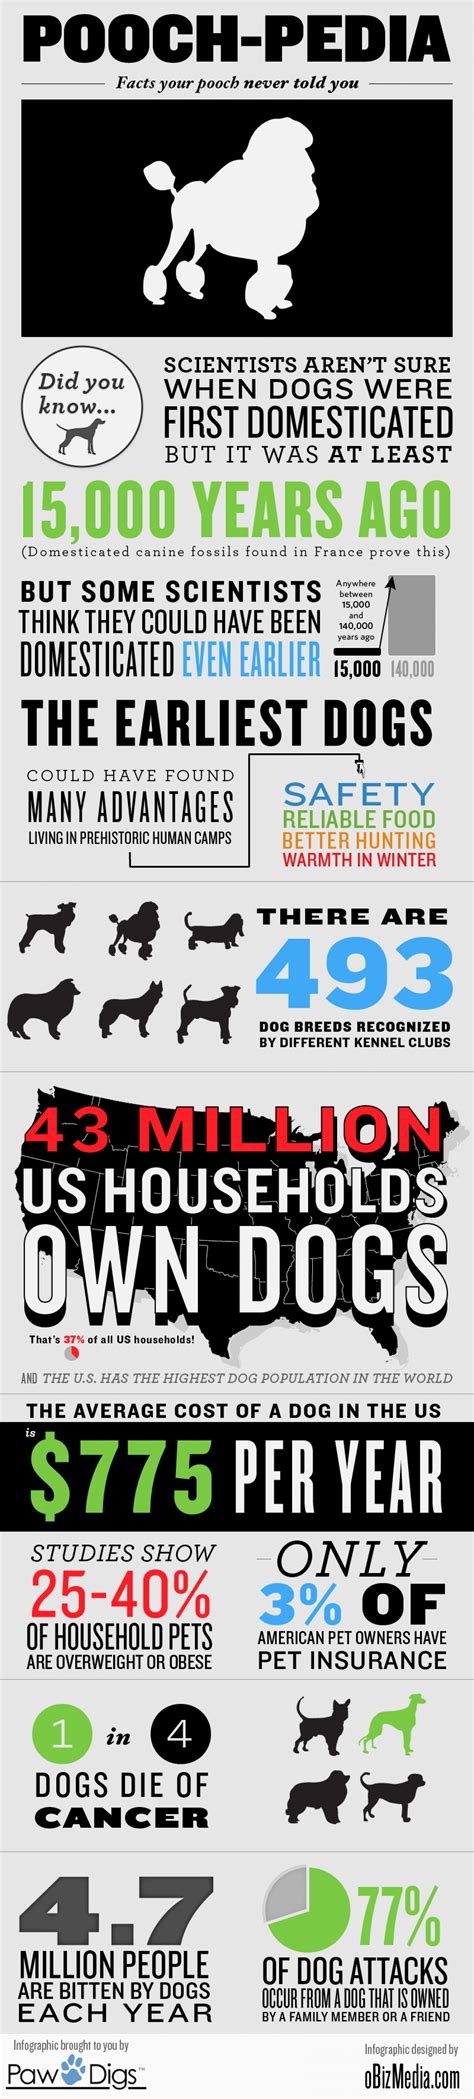 Pooch-pedia: Facts Your Pooch Never Told You #dogs | Dog infographic, Told you so, Infographic